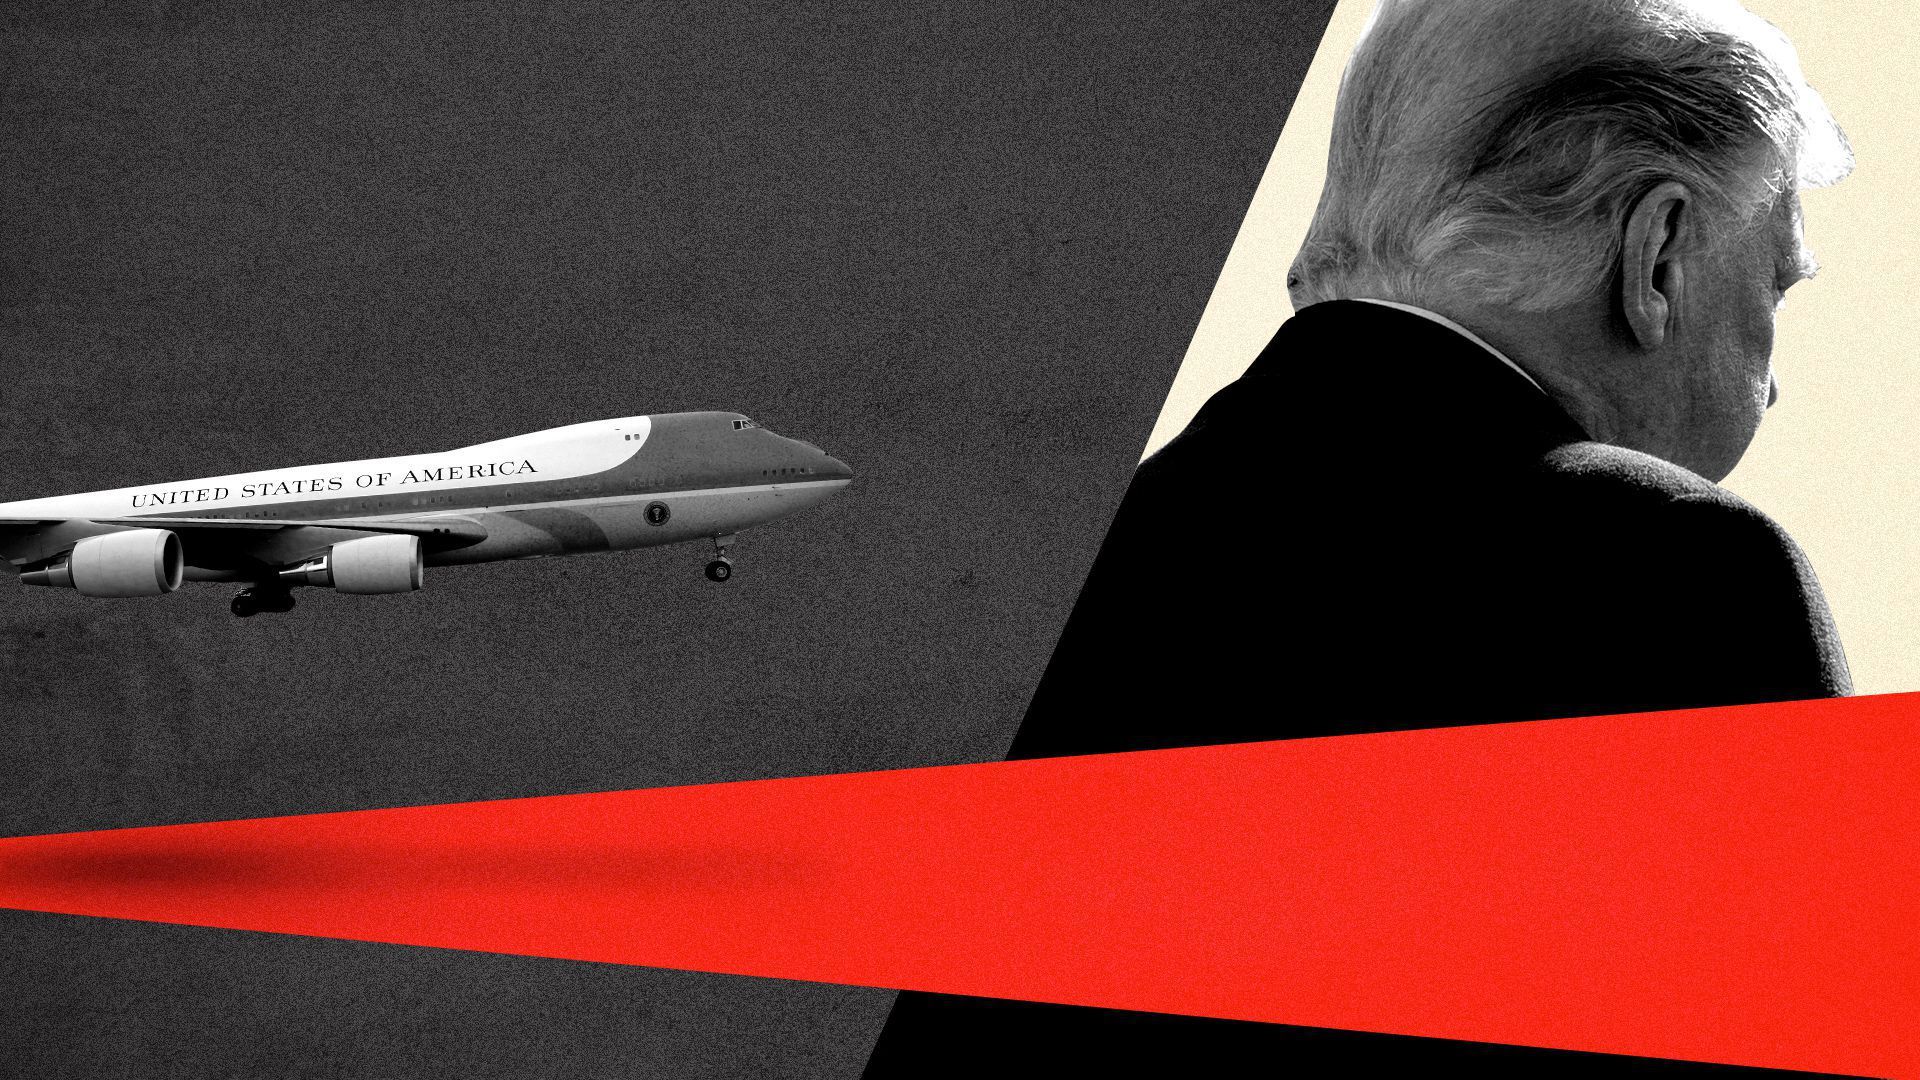 Trump and Air Force One illustration